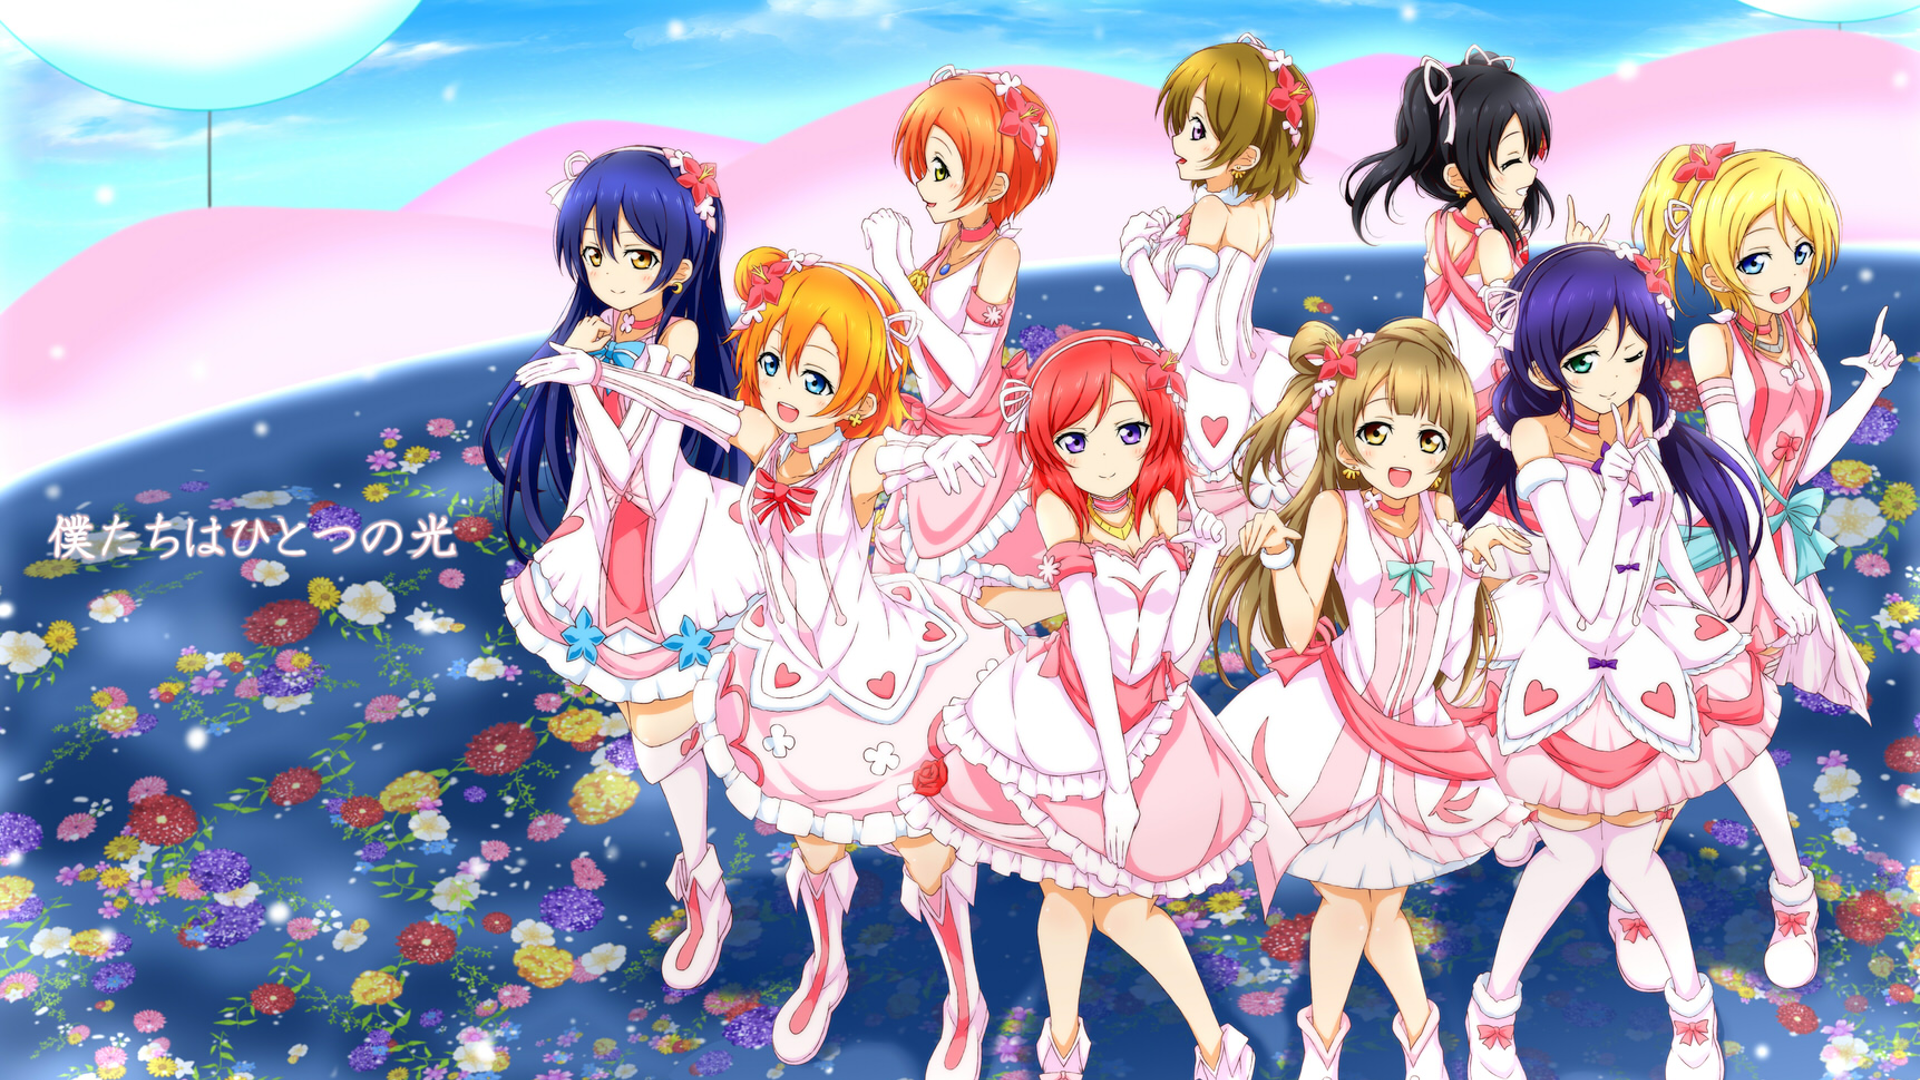 1920x1080 We Are One Light Love Live Animewallpaper